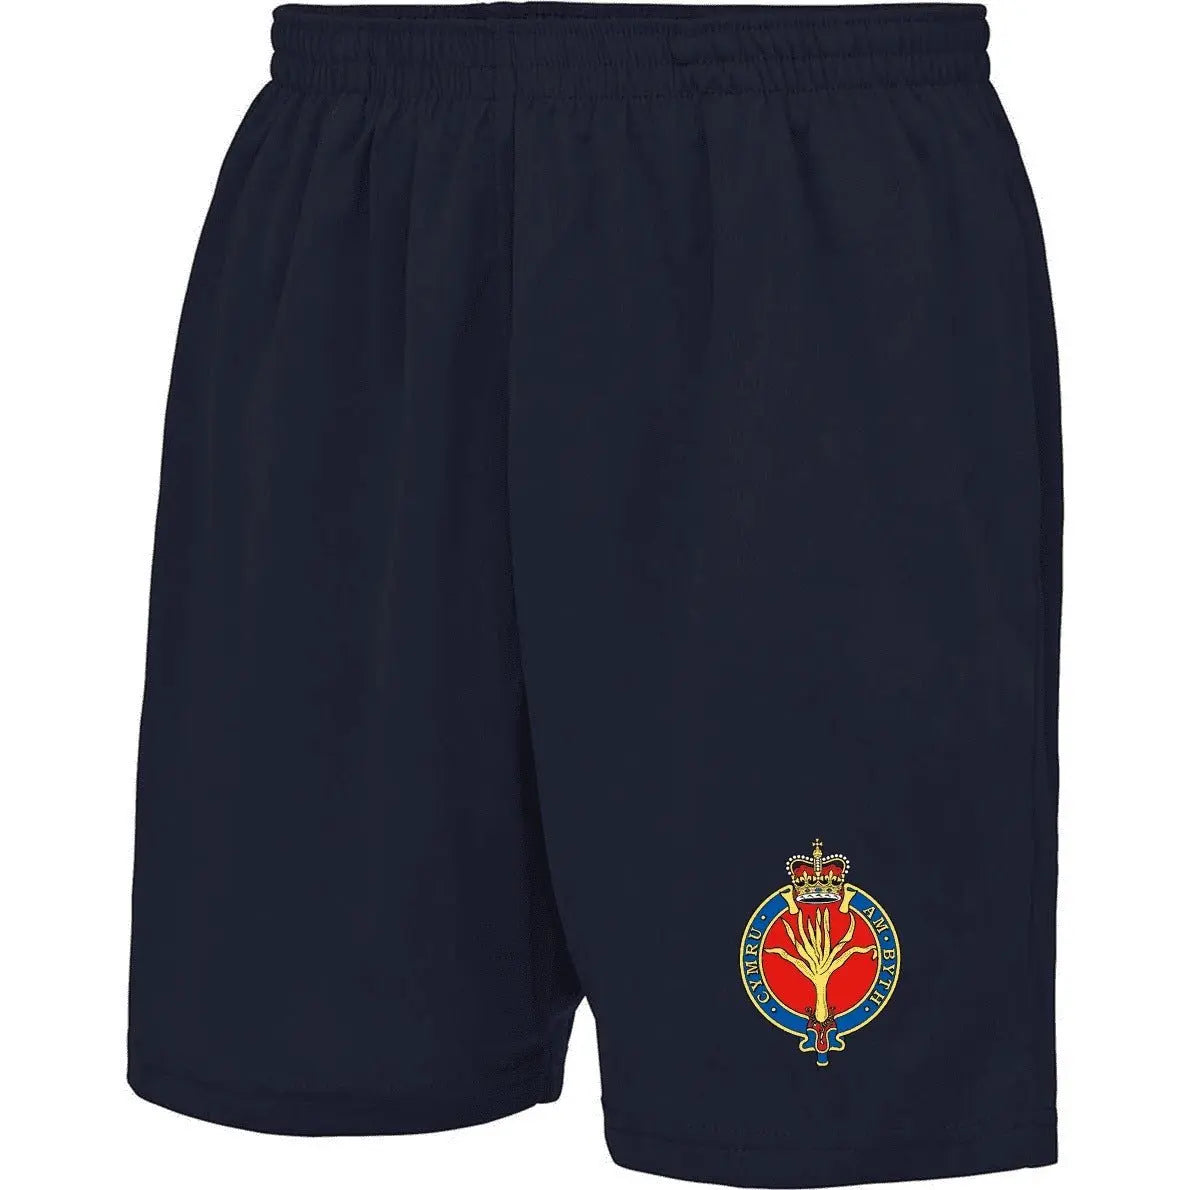 Welsh Guards Sports Shorts redplume